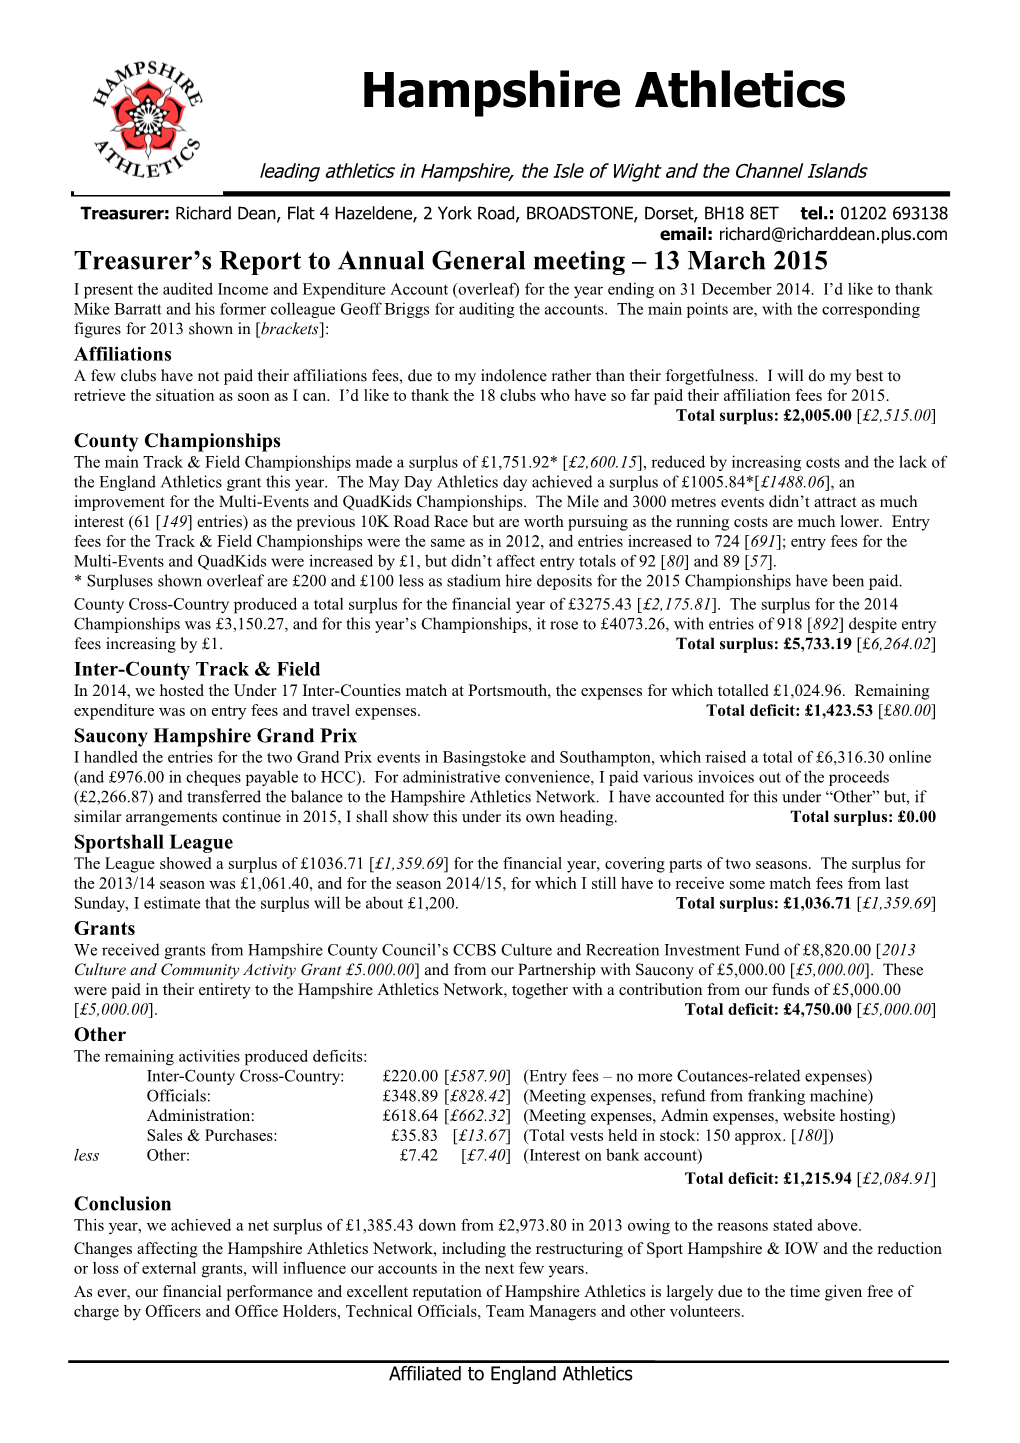 Treasurer S Report to Annual General Meeting 13 March 2015